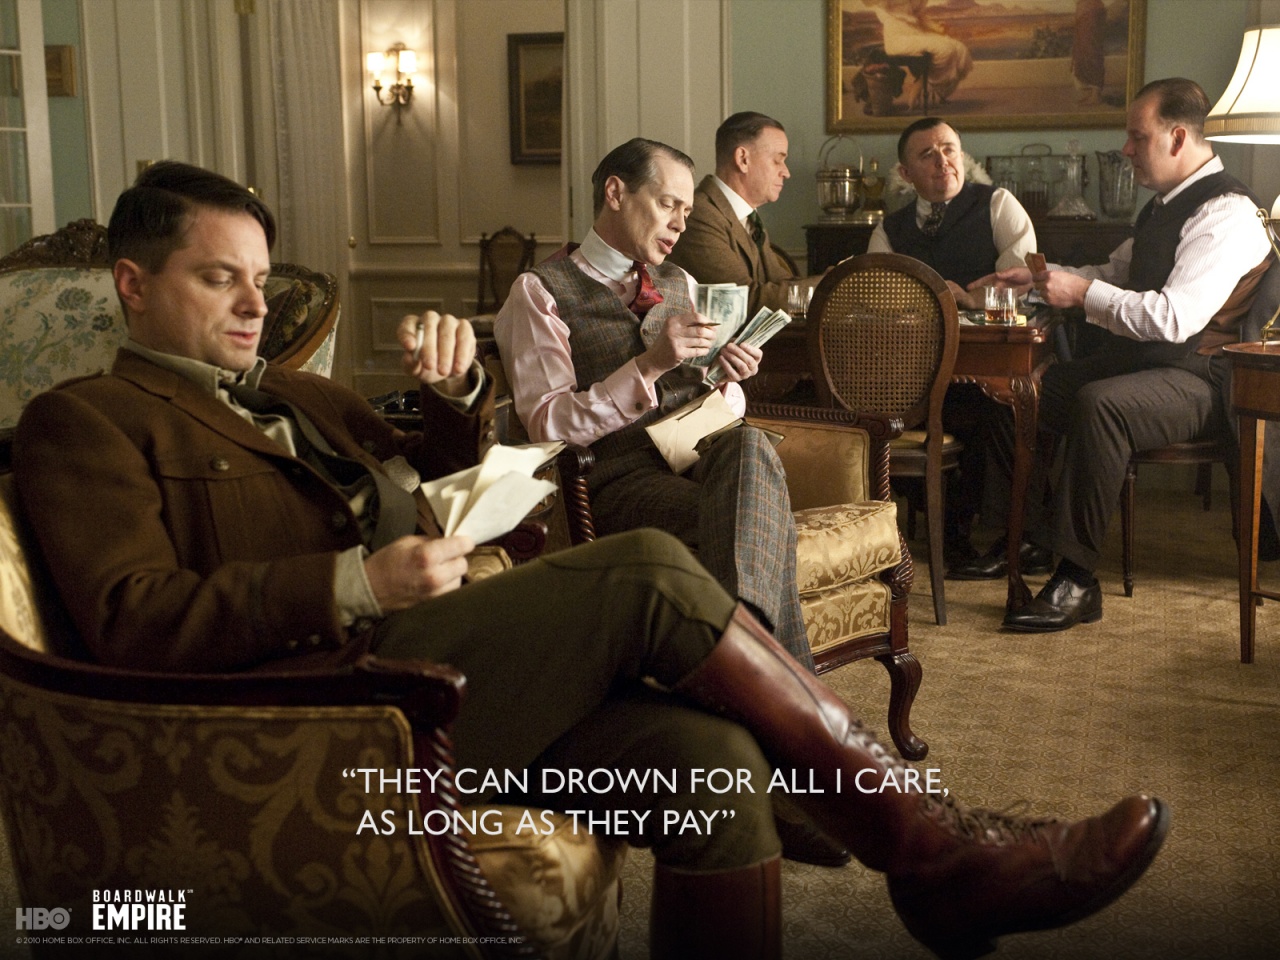 They can drown, while they pay - Boardwalk Empire